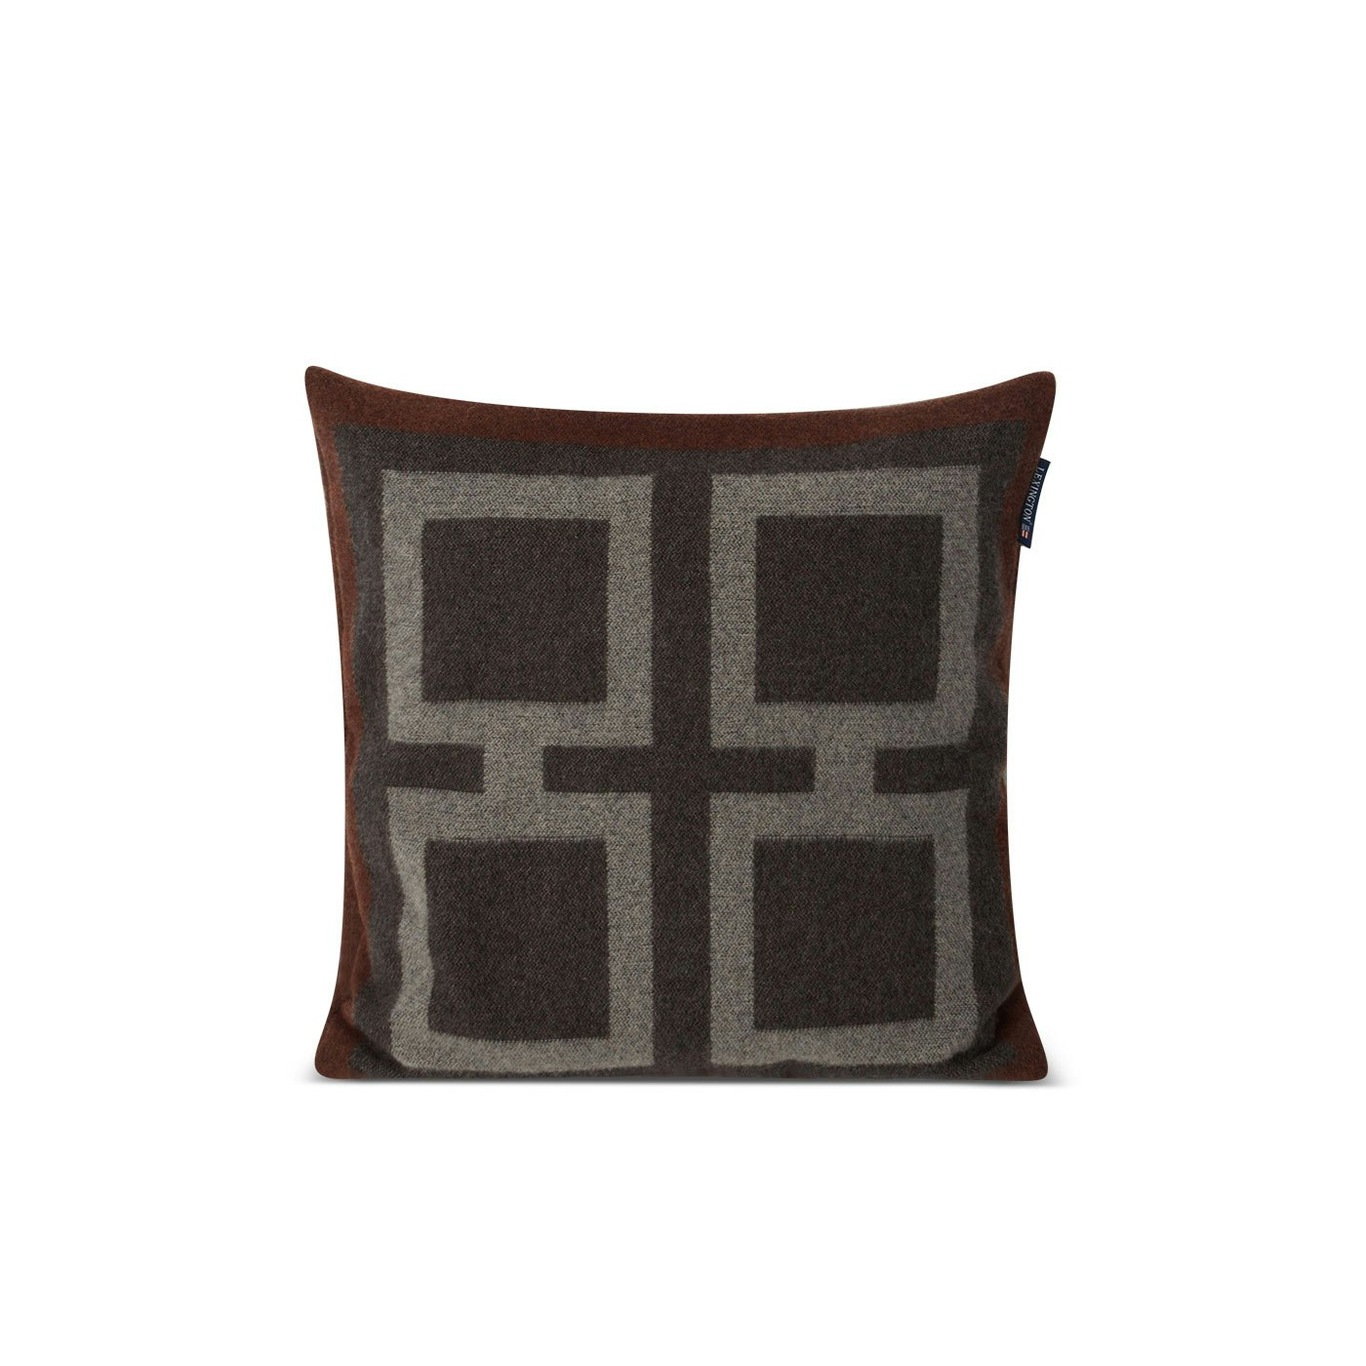 Graphic Recycled Wool Pillow Cover Kissenbezug 50x50 cm